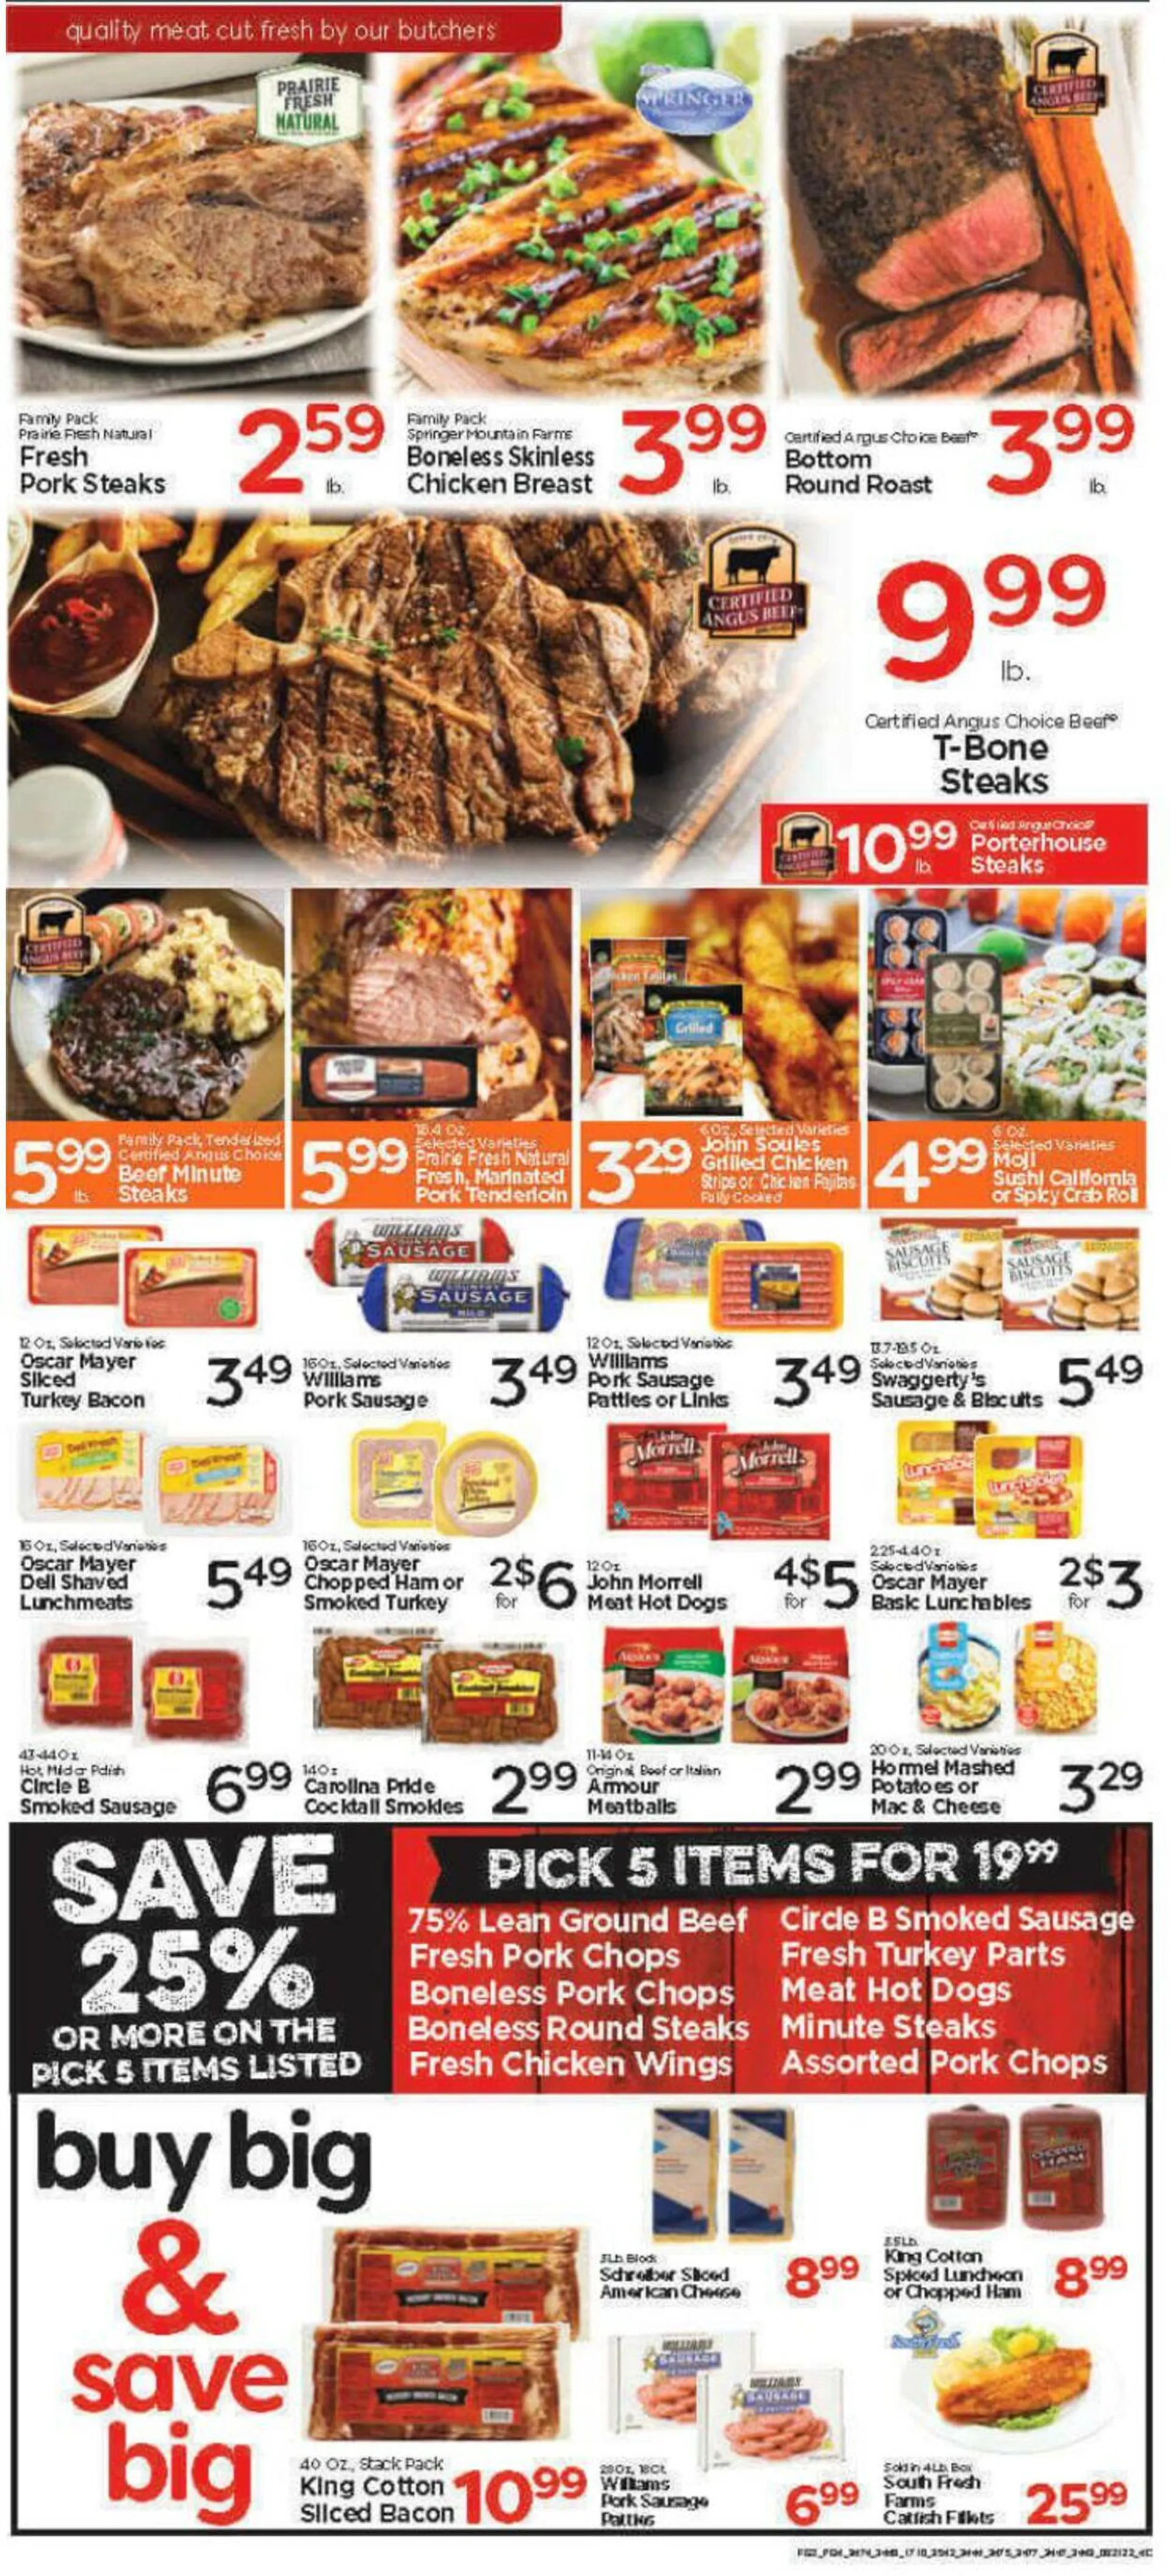 Edwards Food Giant Current weekly ad - 4